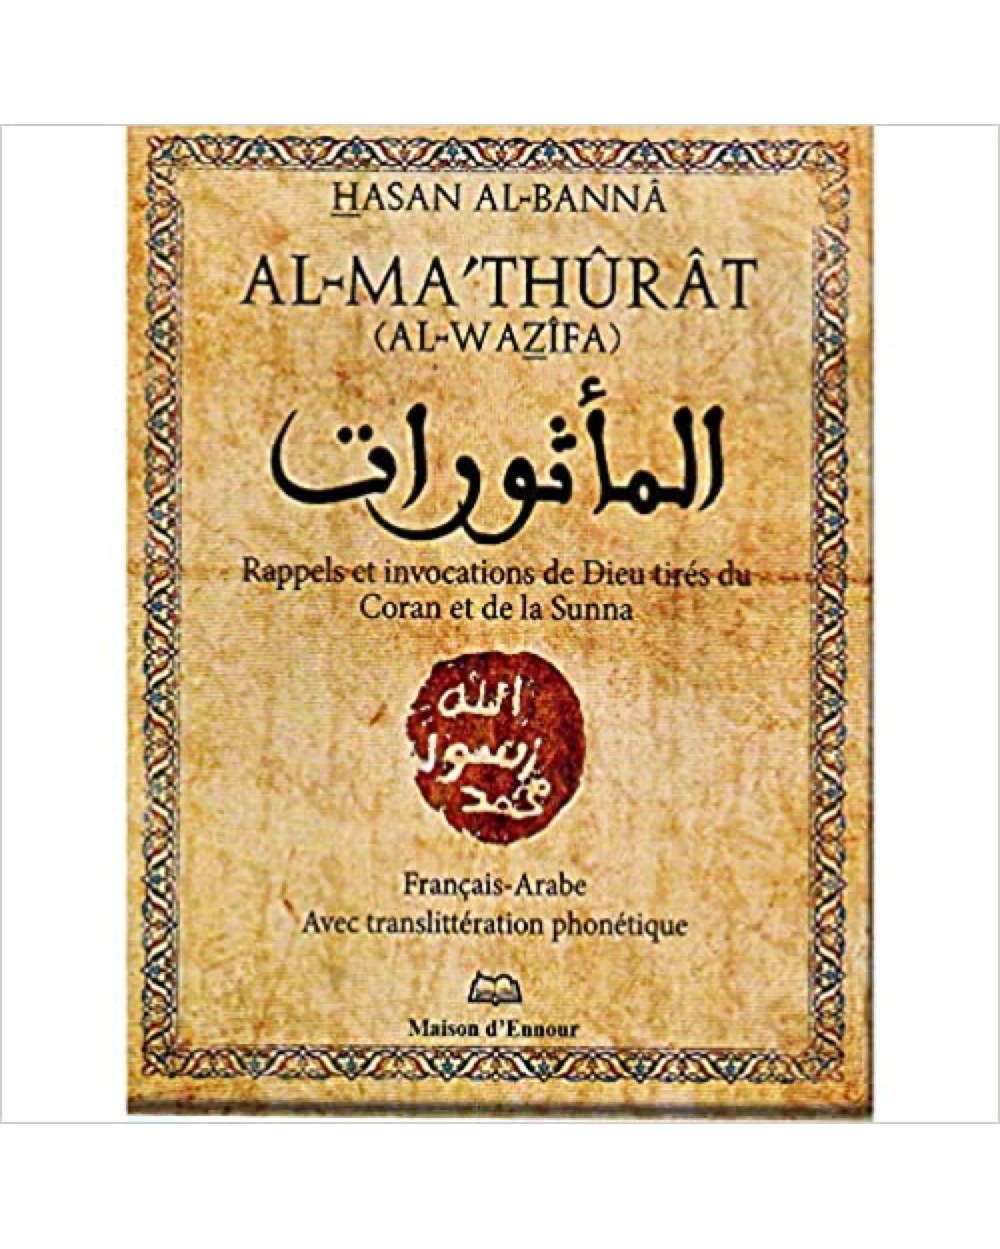 Book Al-Ma'thûrat reminders and invocations